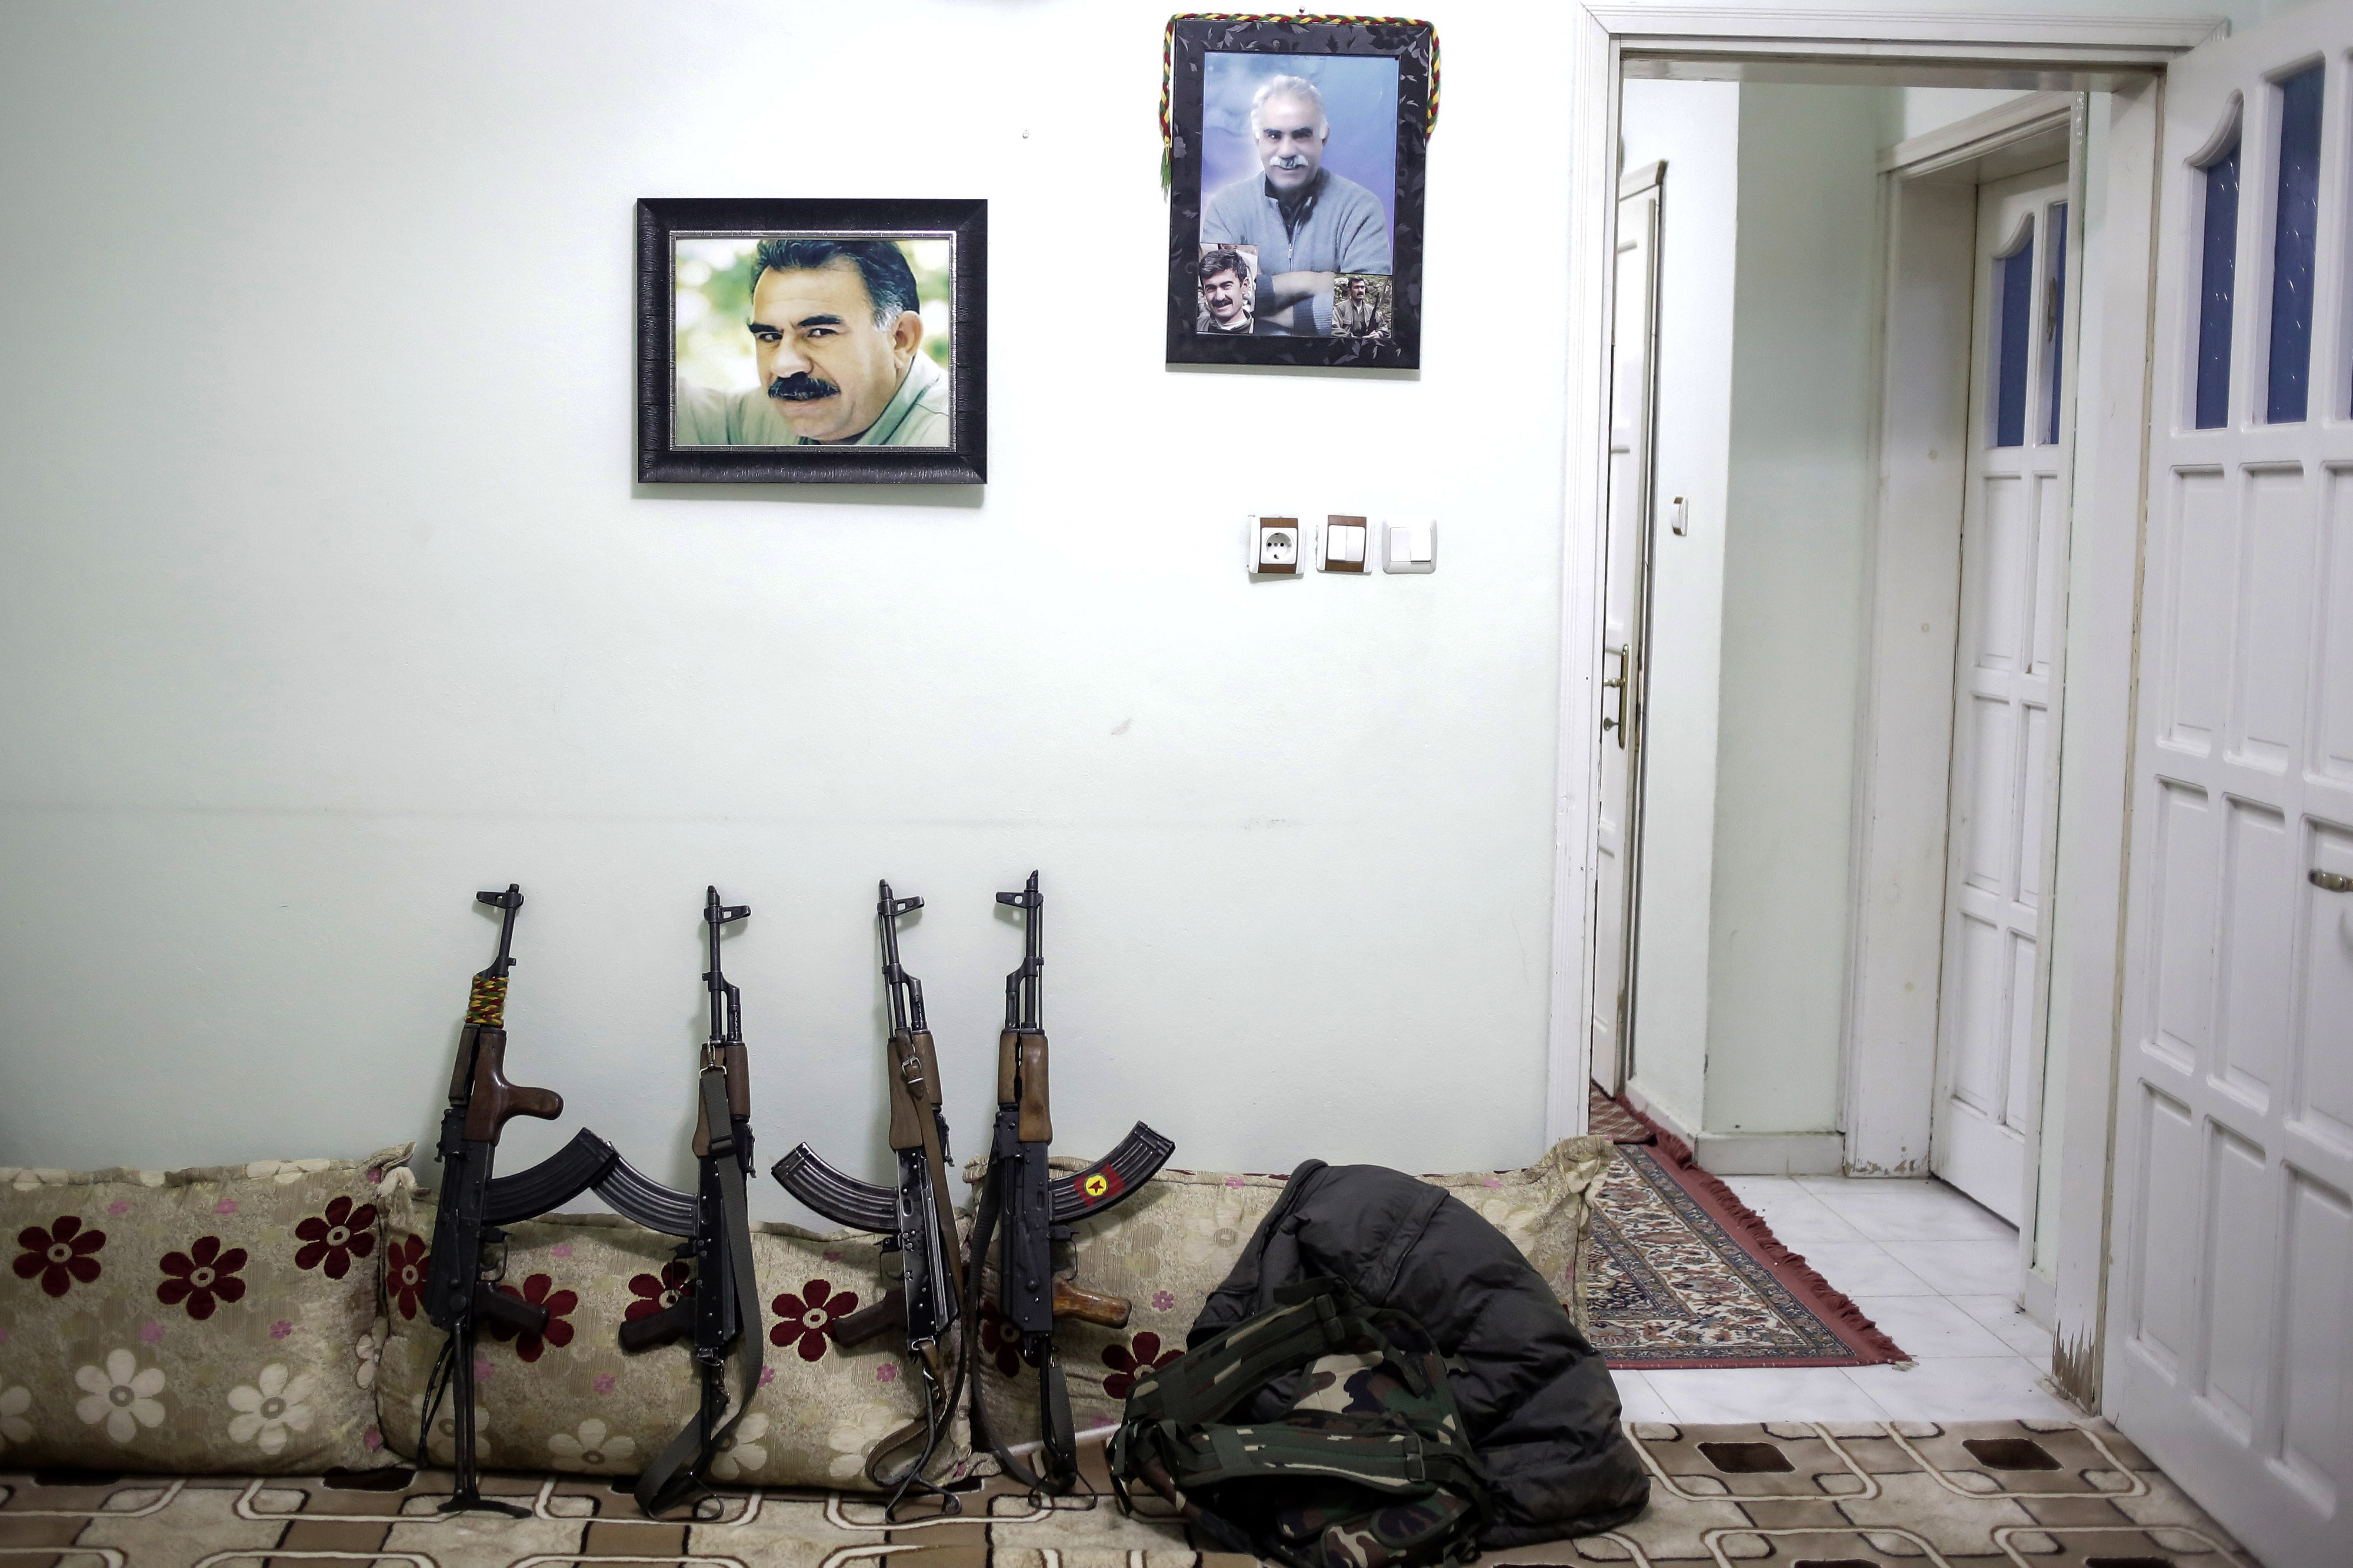 AK-47's of armed group Patriotic Revolutionary Youth Movement (YDG-H), a youth division of the Kurdistan Workers' Party, PKK, stand under jailed Kurdish rebel leader Abdullah Ocalan's pictures in a house in southeastern Turkish city of Nusaybin on February 25, 2016, Turkey. Since mid-December, the Turkish security forces placed to several predominantly Kurdish cities in Turkey under 24-hour martial law and curfew on the premise of restoring public order. (Photo by Cagdas Erdogan/Getty Images)